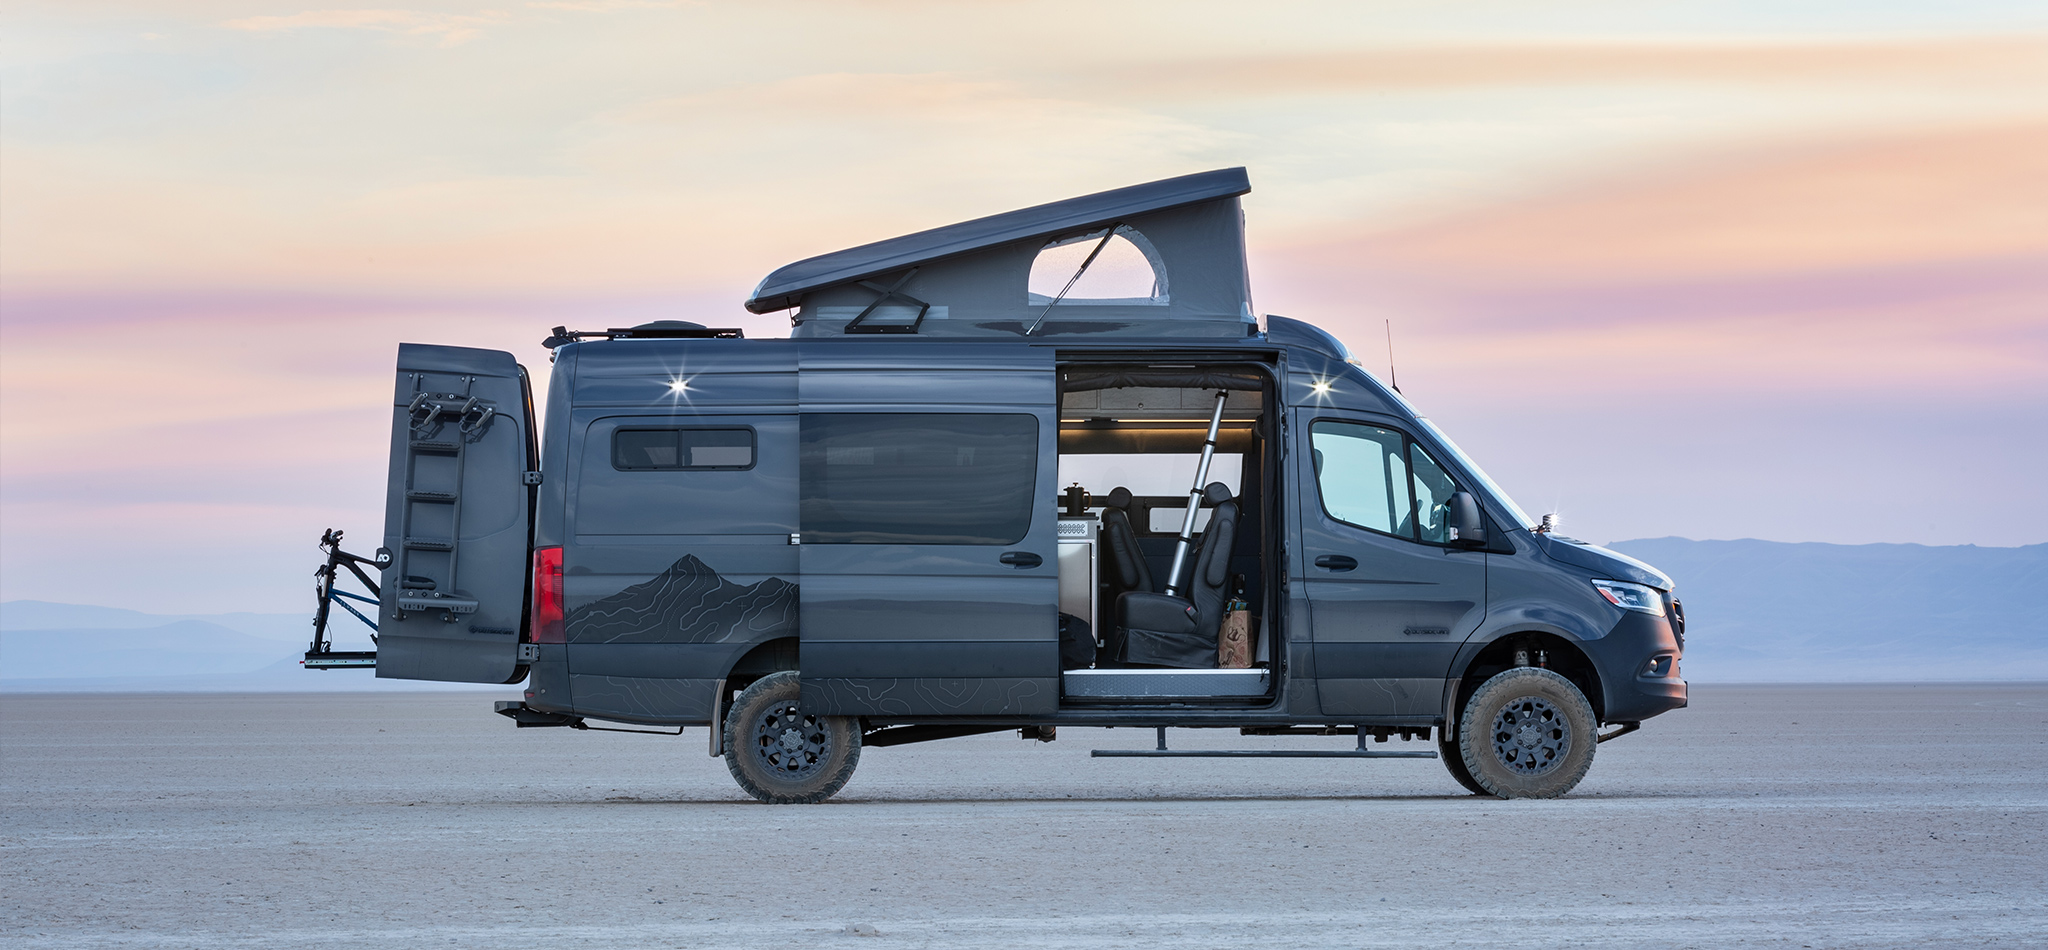 A Sprinter van conversion with a roof top tent and bicycle racks rests on top of a playa at dusk.